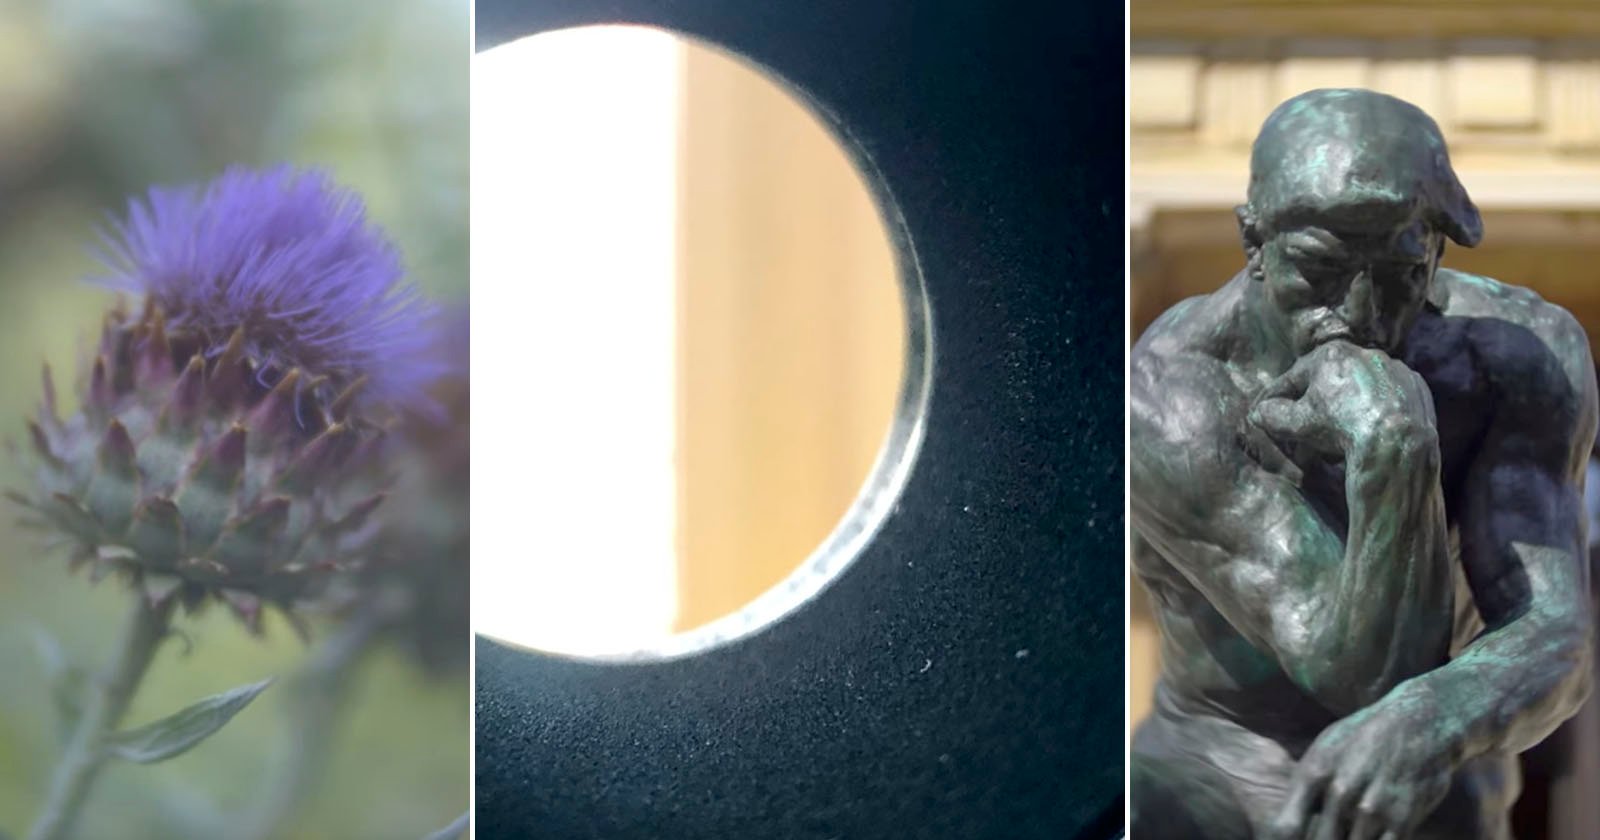 What Happens When You Put the Worlds Blackest Material Inside a Lens